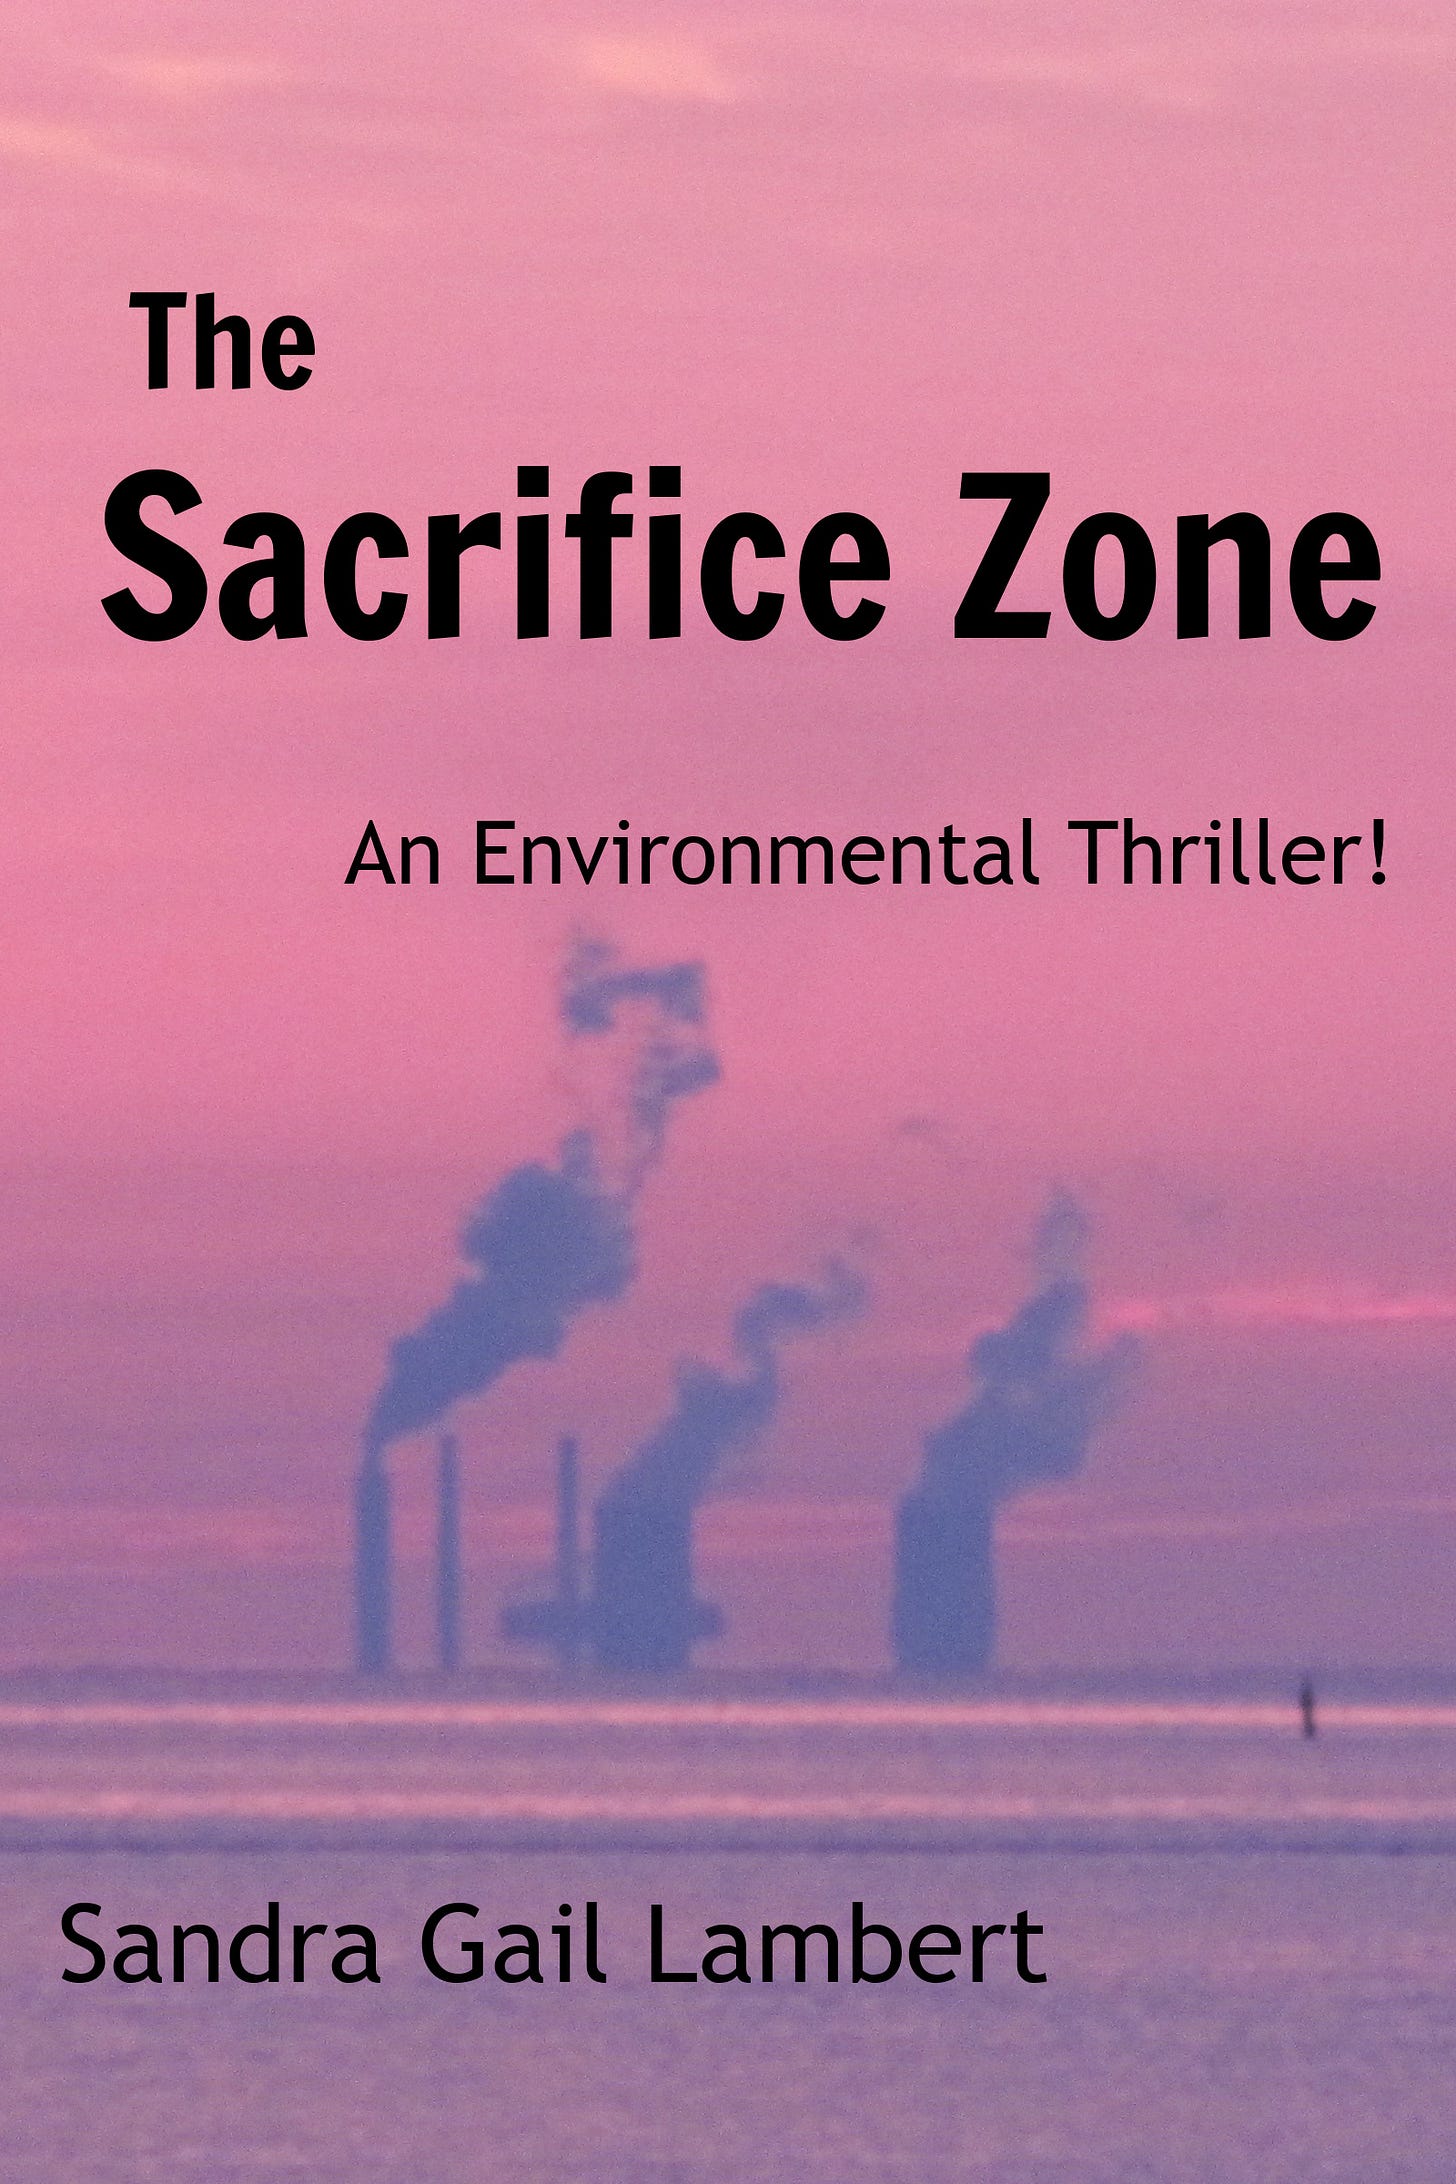 A book cover with the text "The Sacrifice Zone: An Environmental Thriller by Sandra Gail Lambert" The background is pink and there is the blurred image of a power plant stacks spewing smoke in the distance over water. 